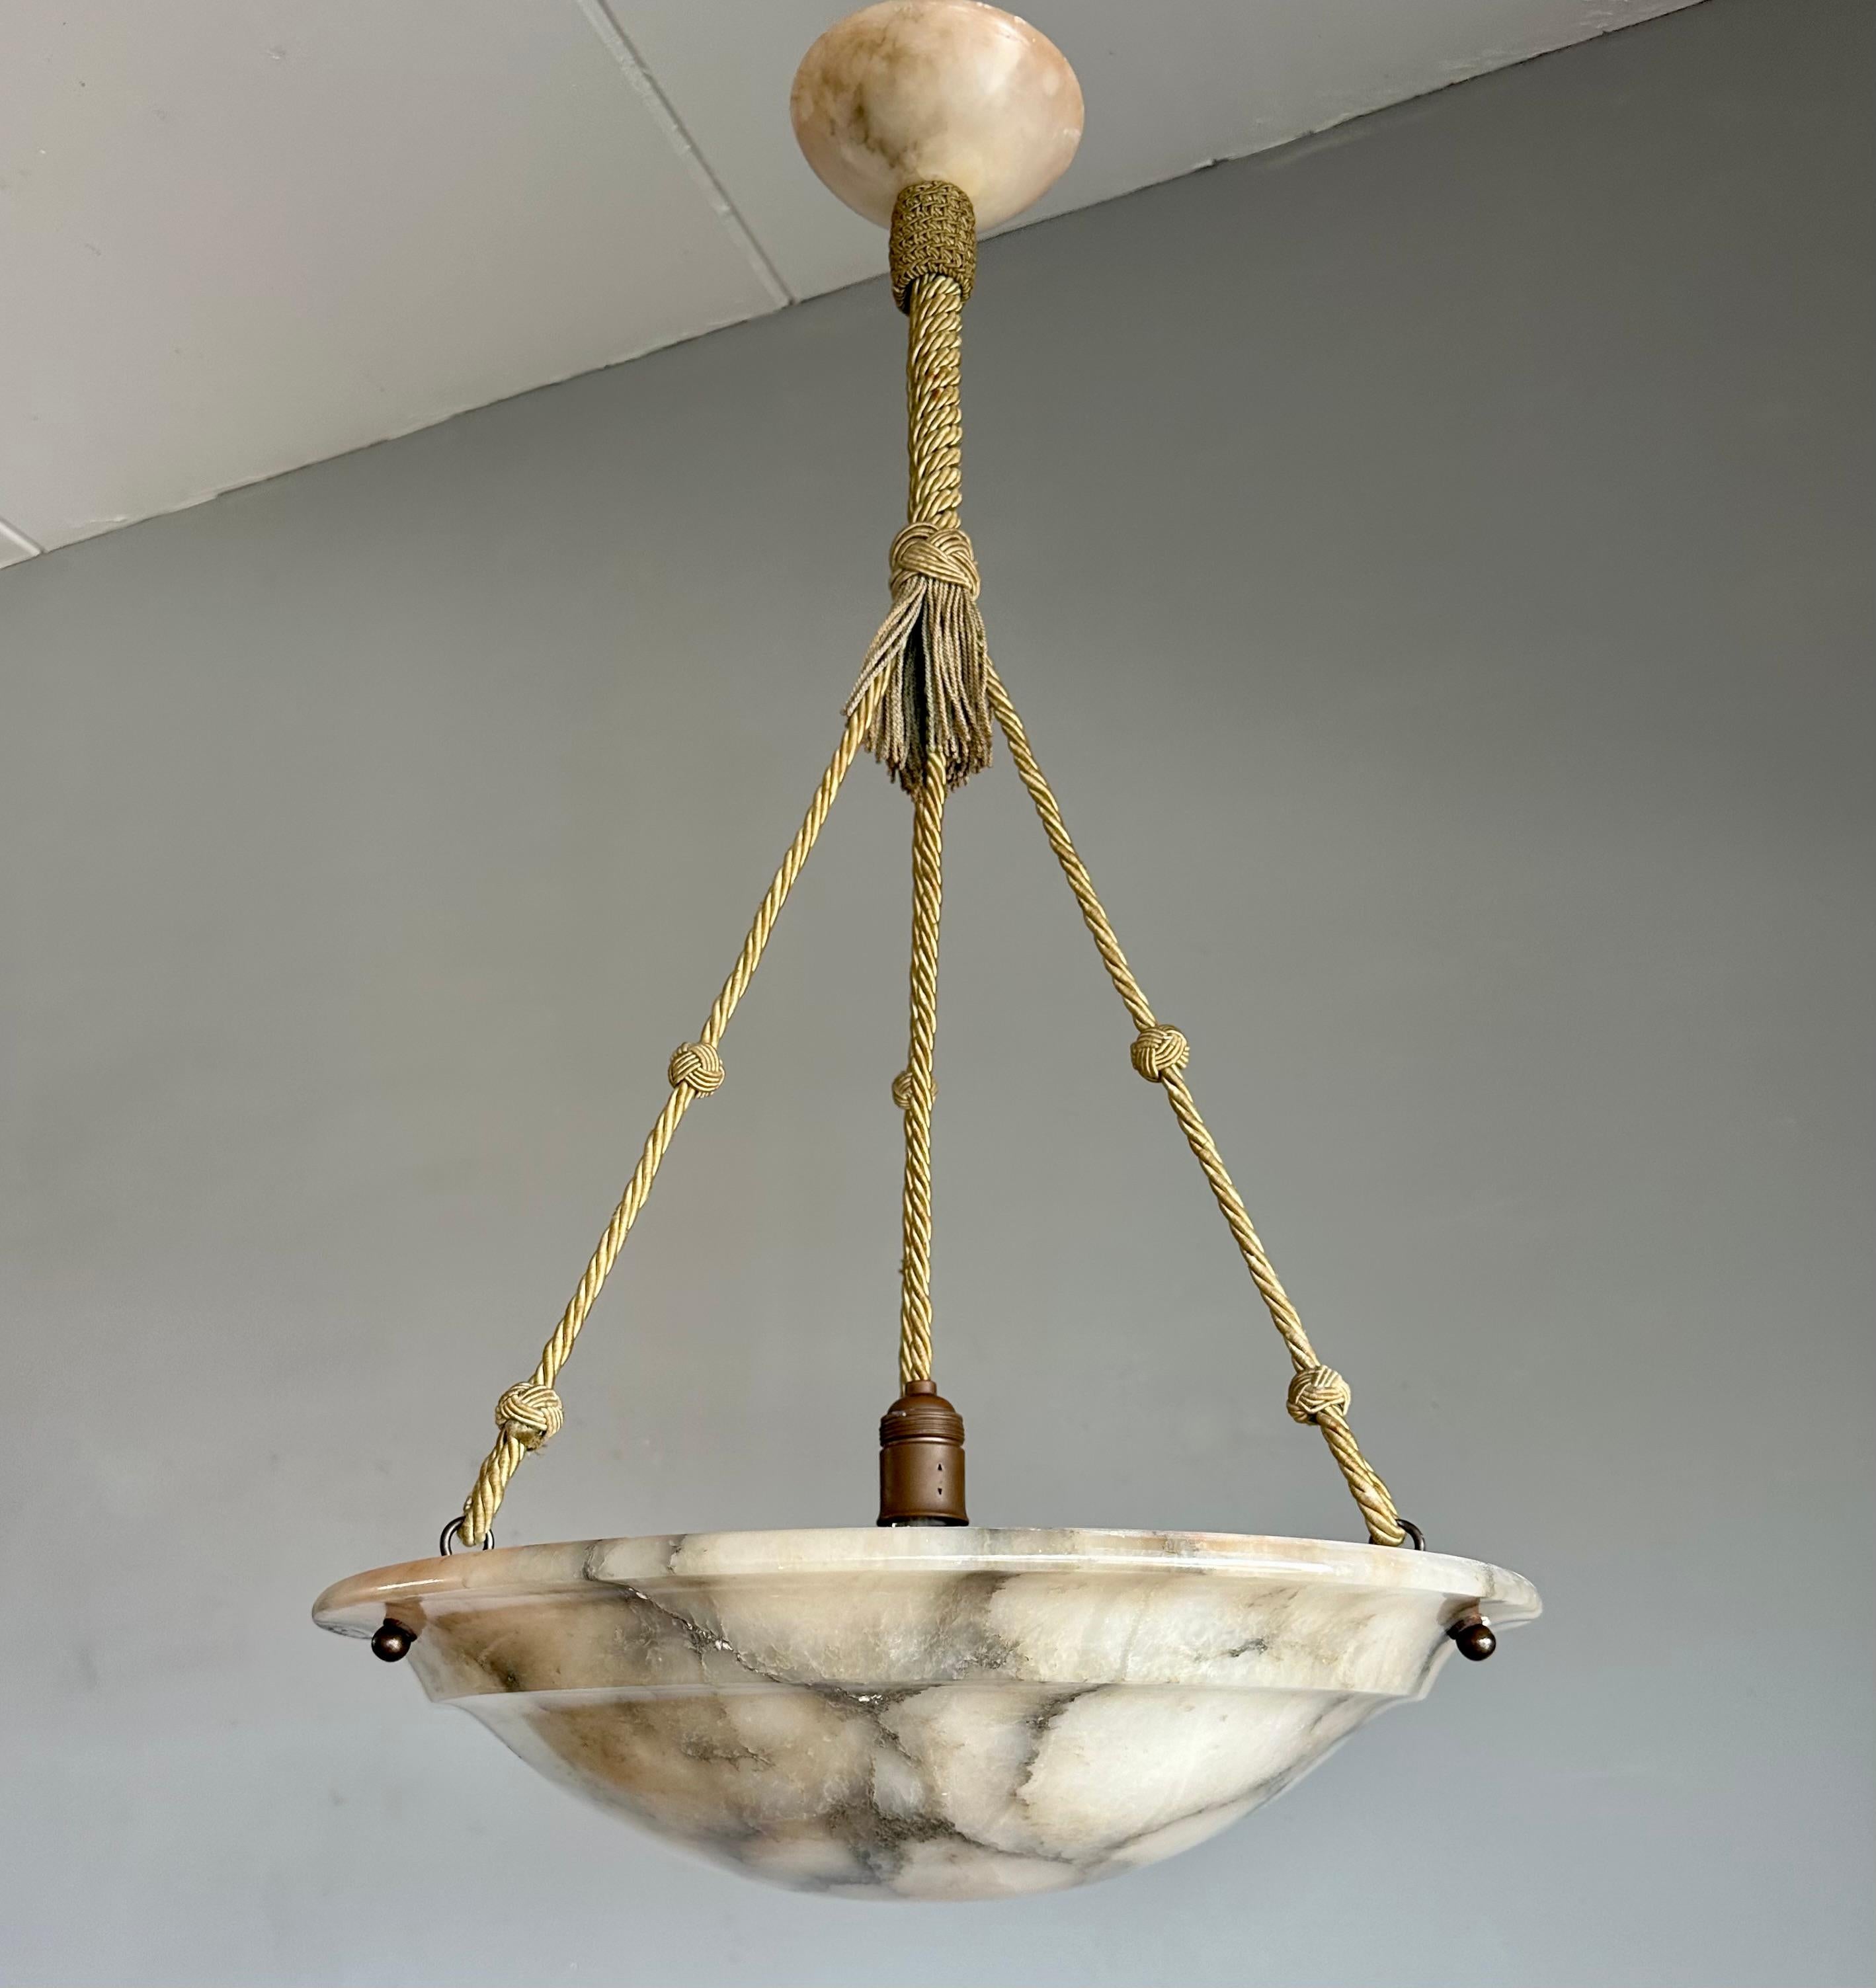 Top class, hand carved and layered alabaster chandelier.

Thanks to its timeless design, aesthetic beauty, large size and superb condition this antique alabaster chandelier is bound to light up both your days and evenings. It is all hand-crafted in